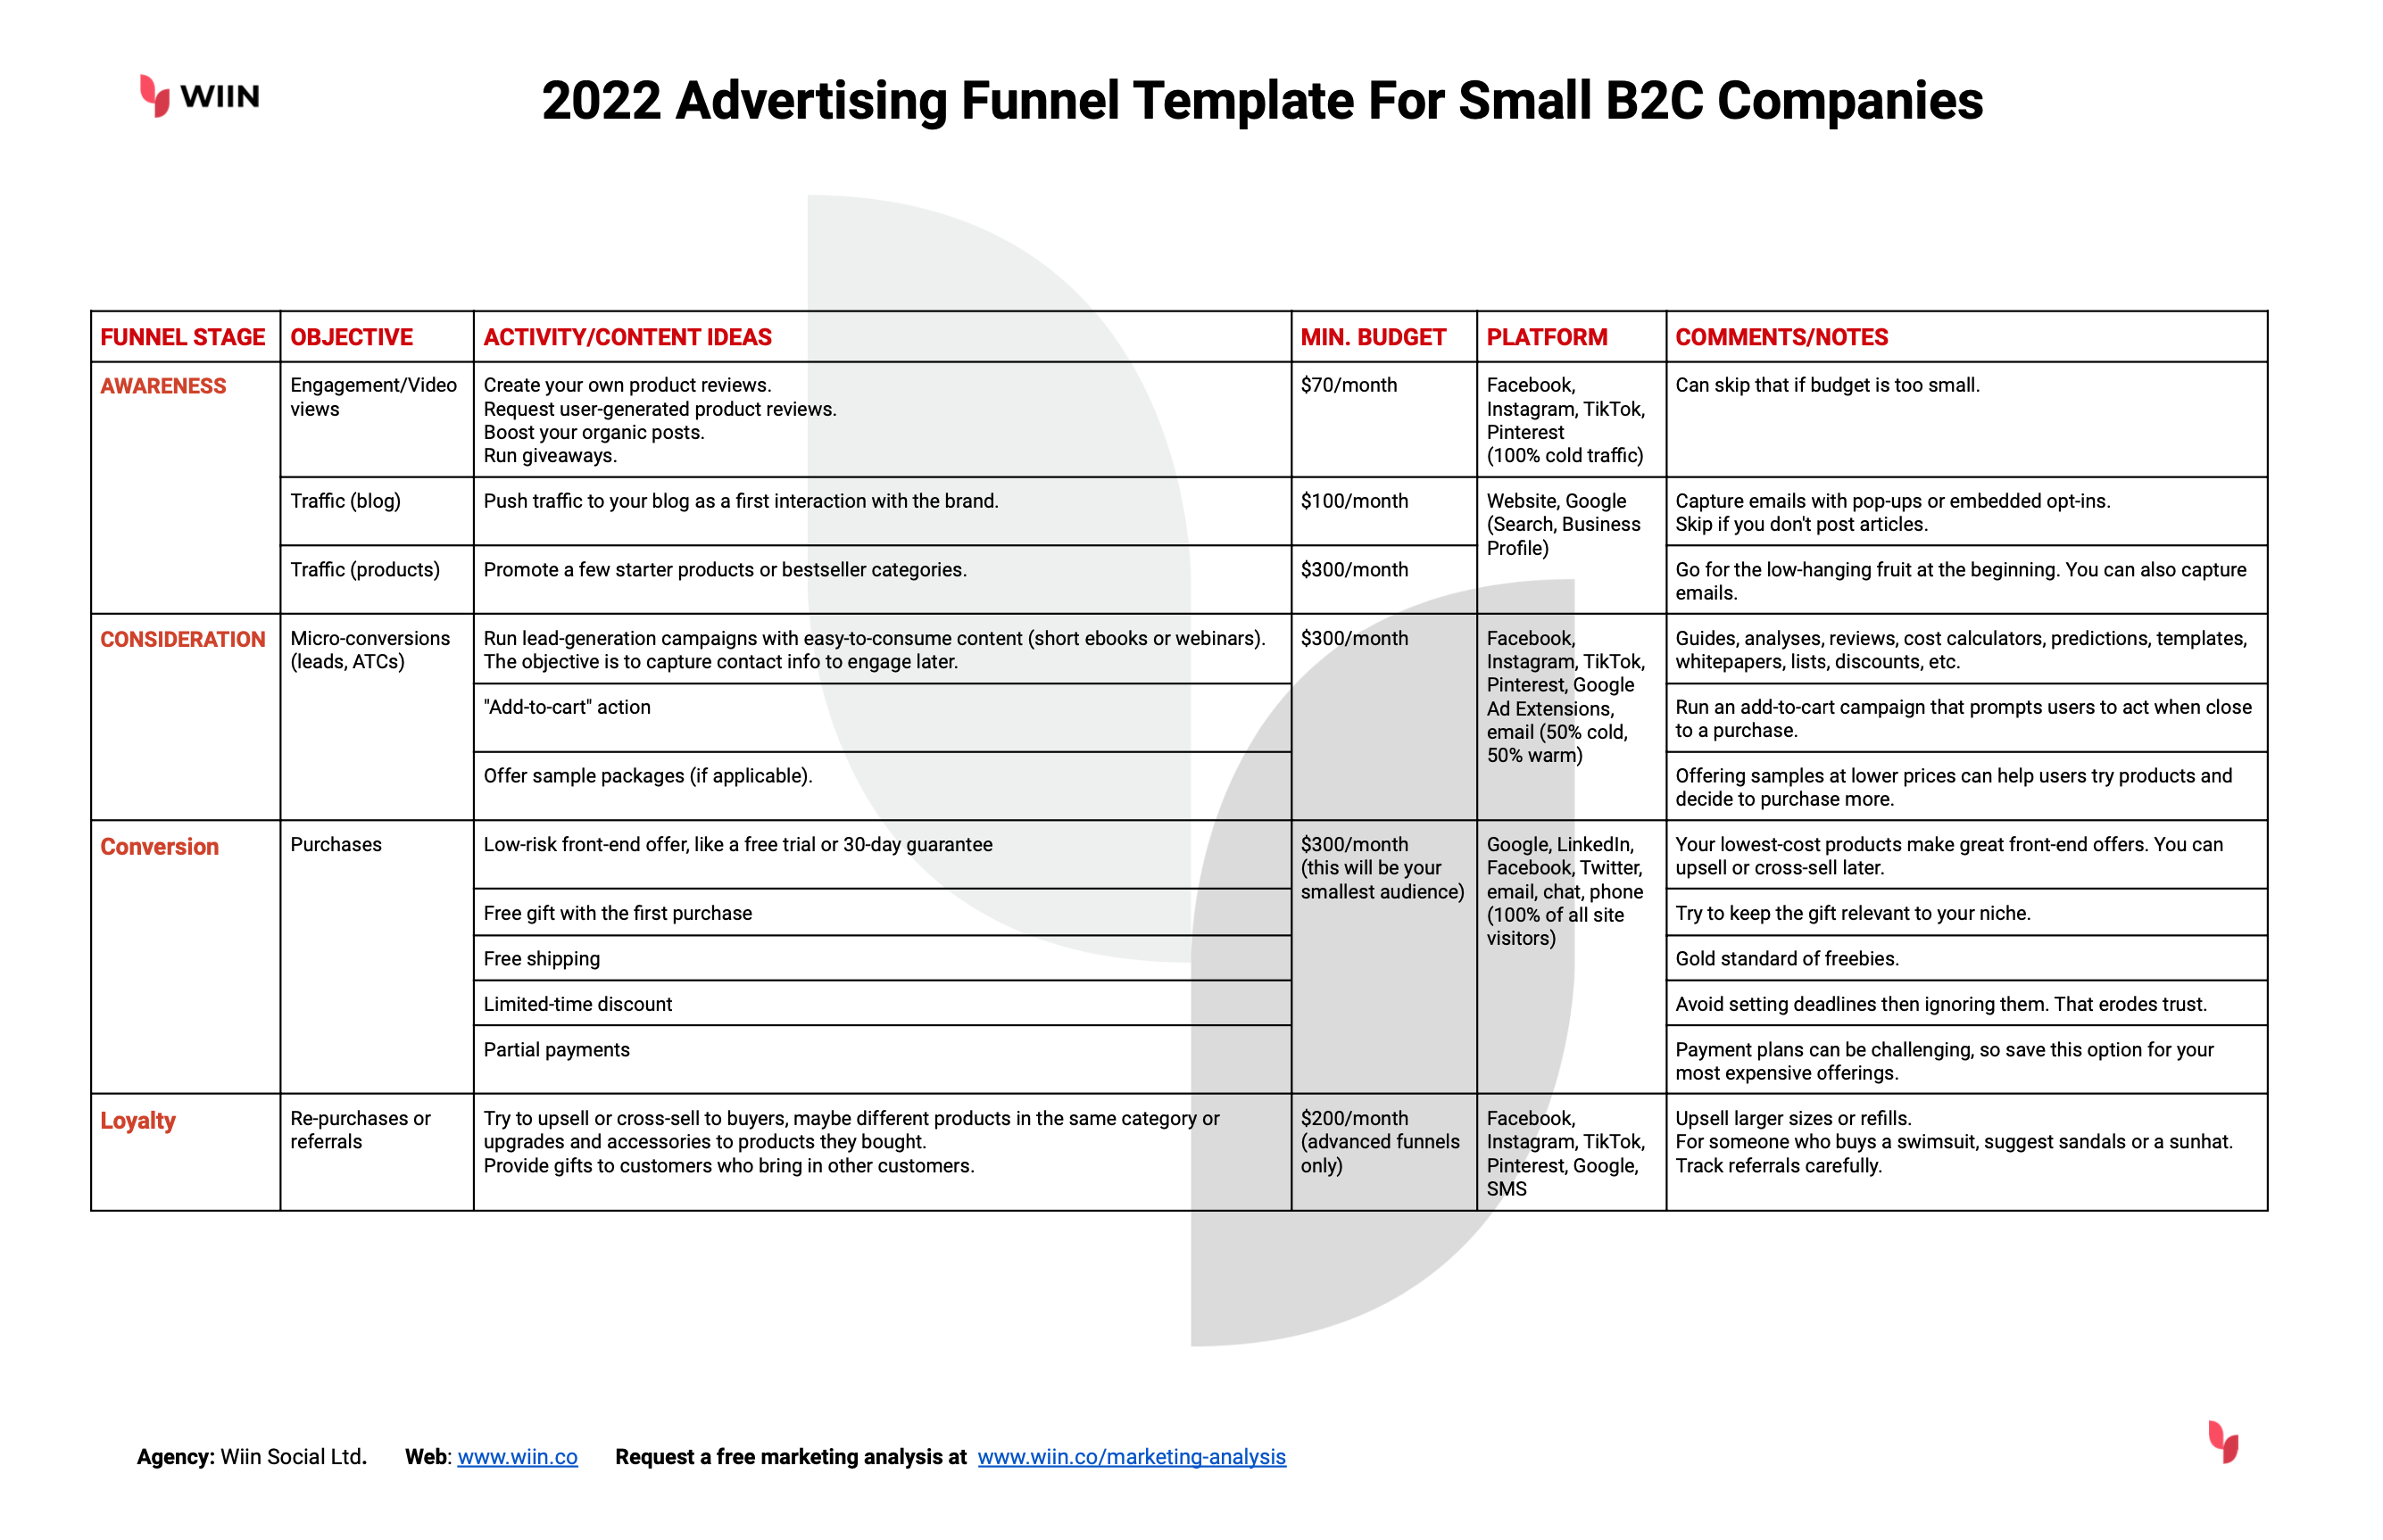 2022 Advertising Funnel Template For Small B2C Companies